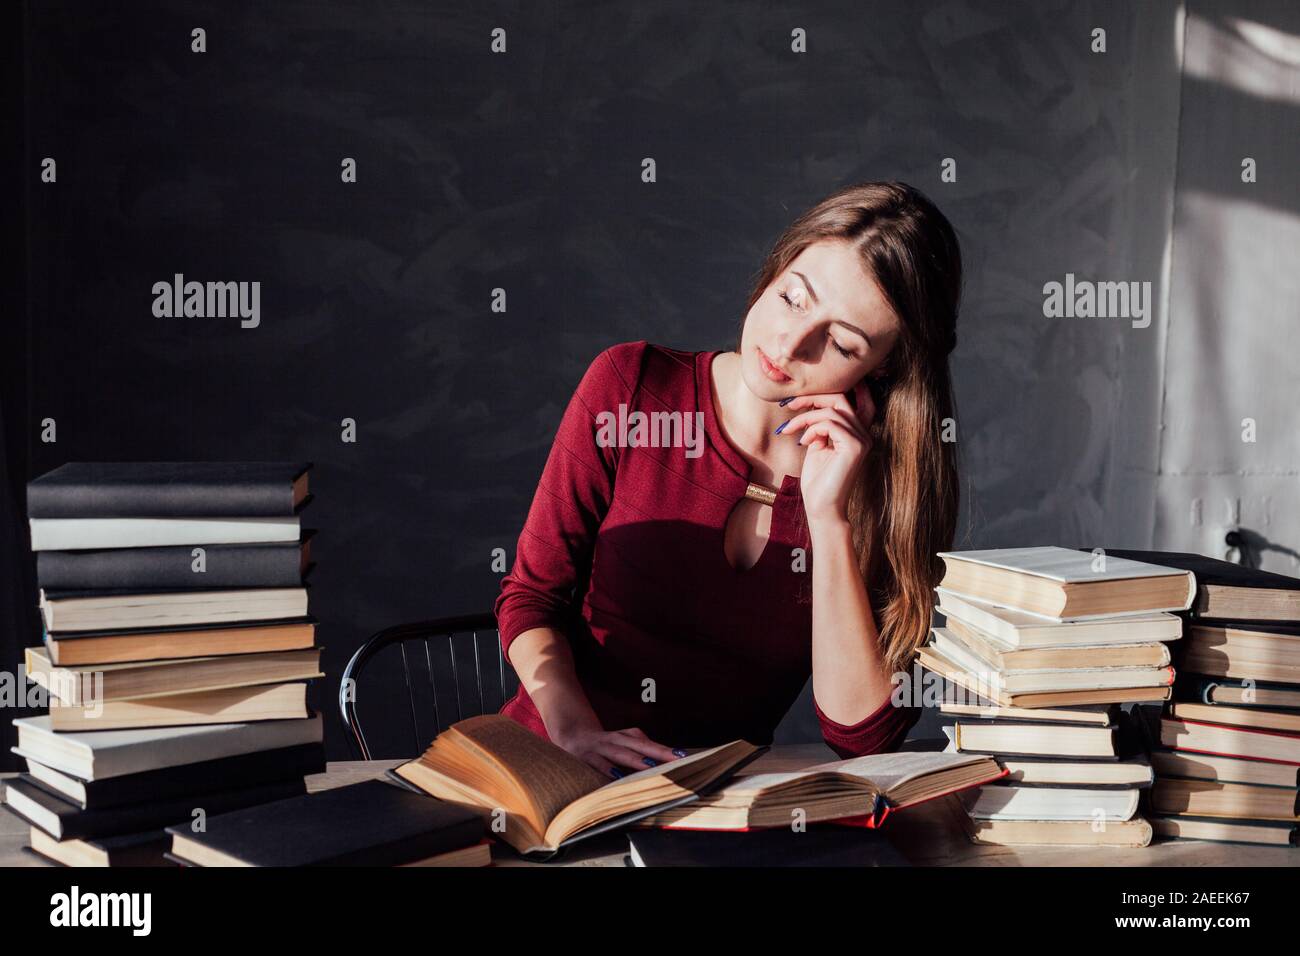 the girl sitting at the table reading a lot of books Stock Photo